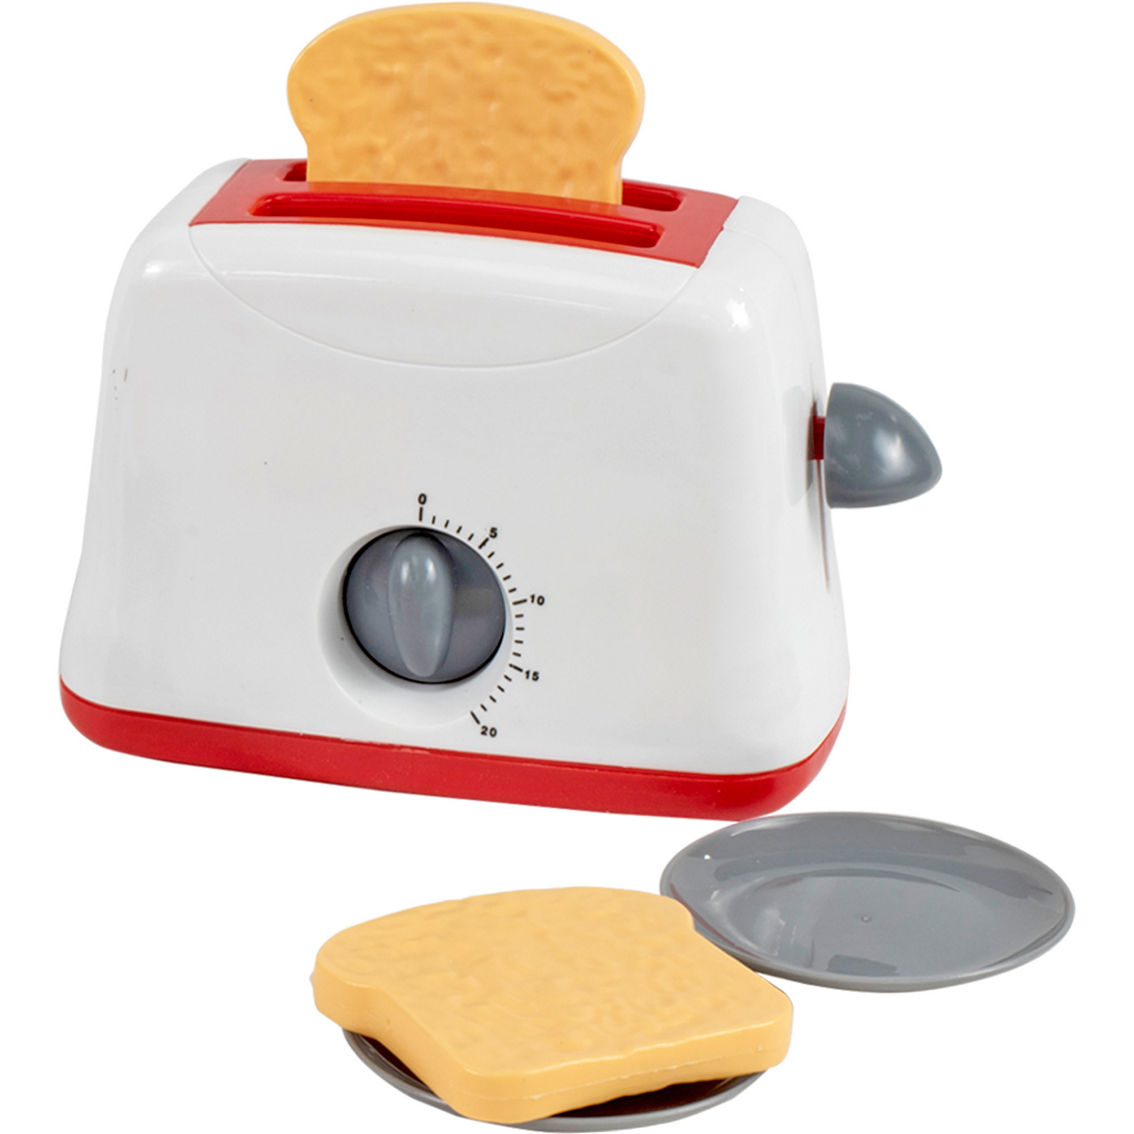 Dollar Queen Deluxe Kitchen Toaster and Coffee Maker Playset - Image 3 of 4